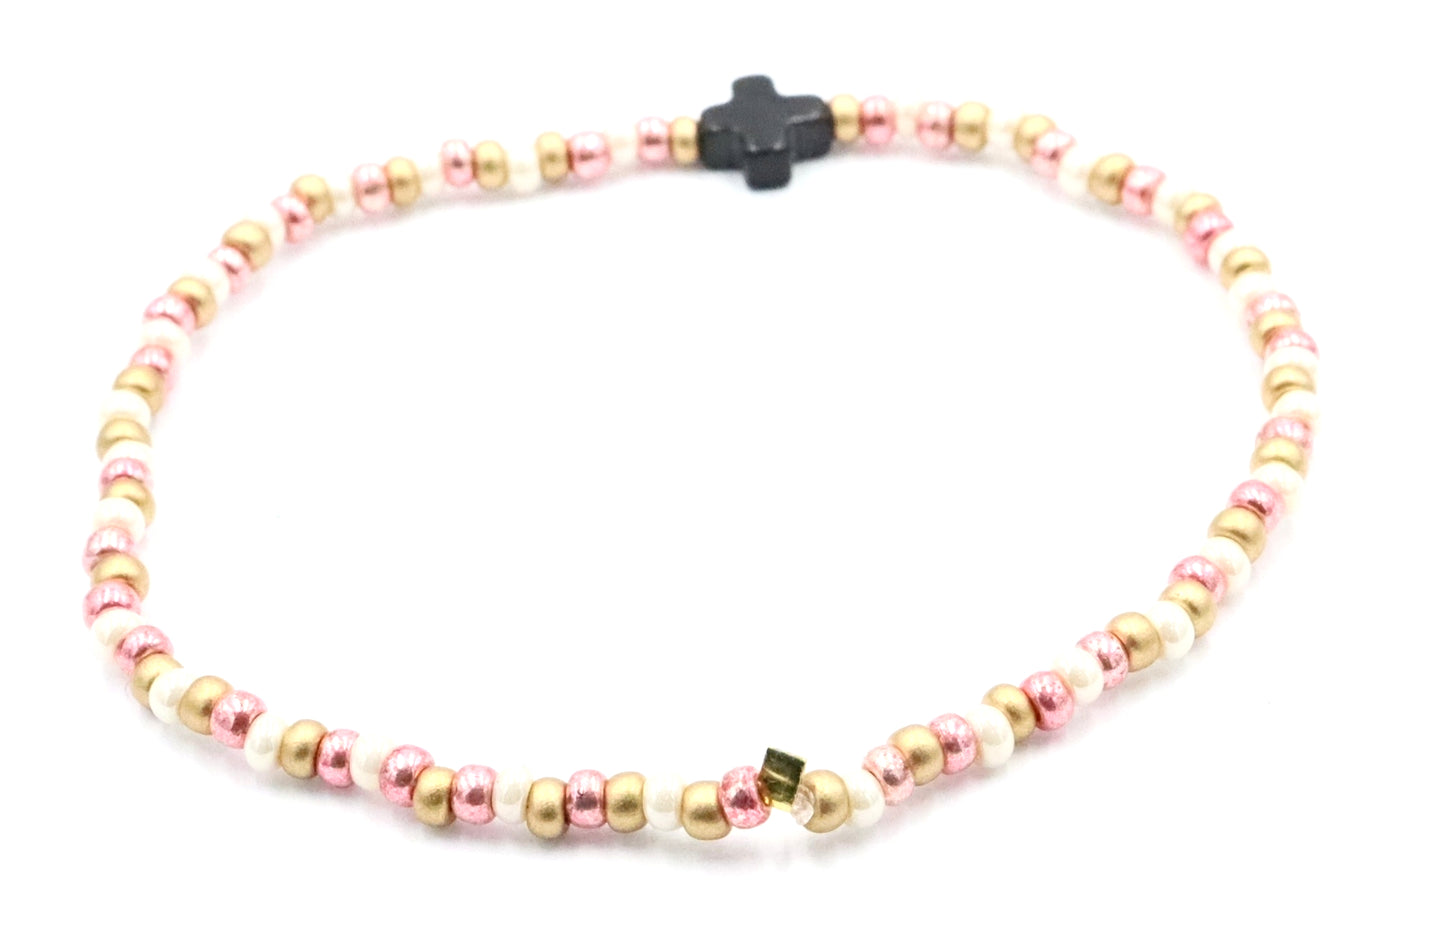 Neapolitan Cross Pearlescent White, Pink, and Matte Gold Glass Beads Bracelet by Monkey's Mojo